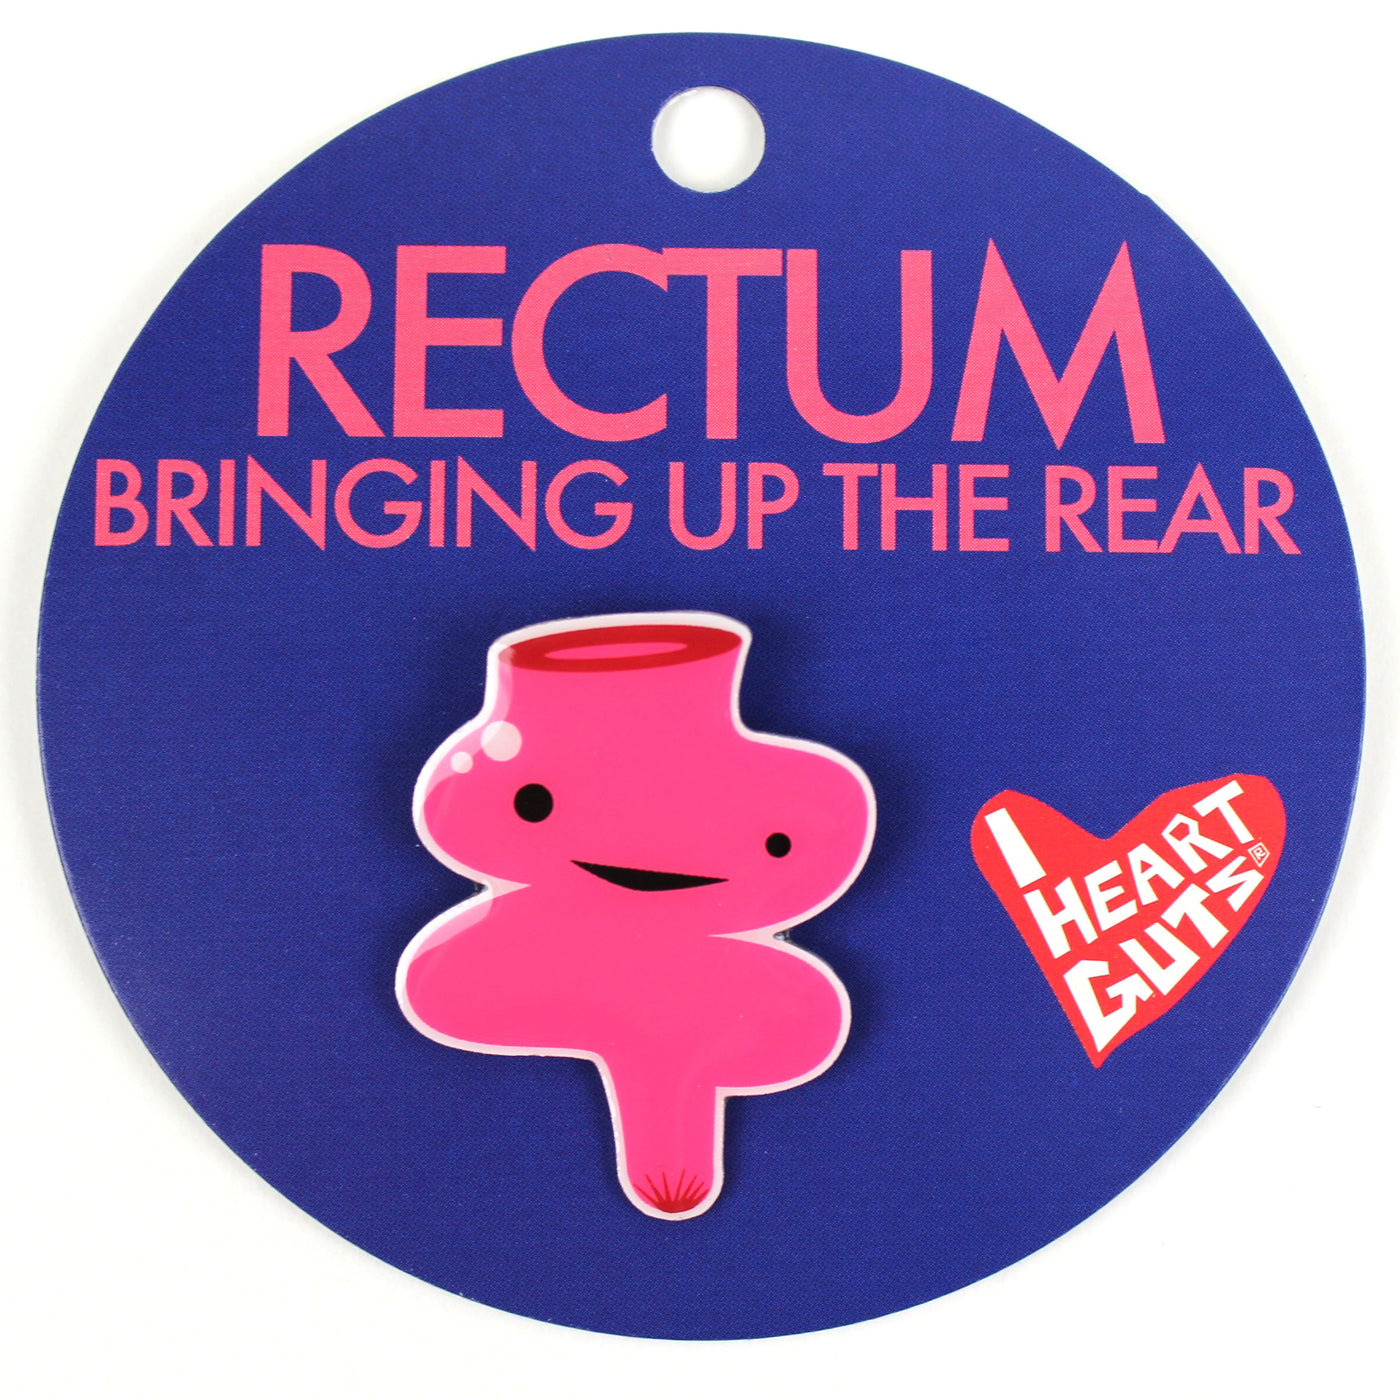 Rectum Pins | Cute Rectal Pins & Gifts - Colorectal Surgery Funny Pins